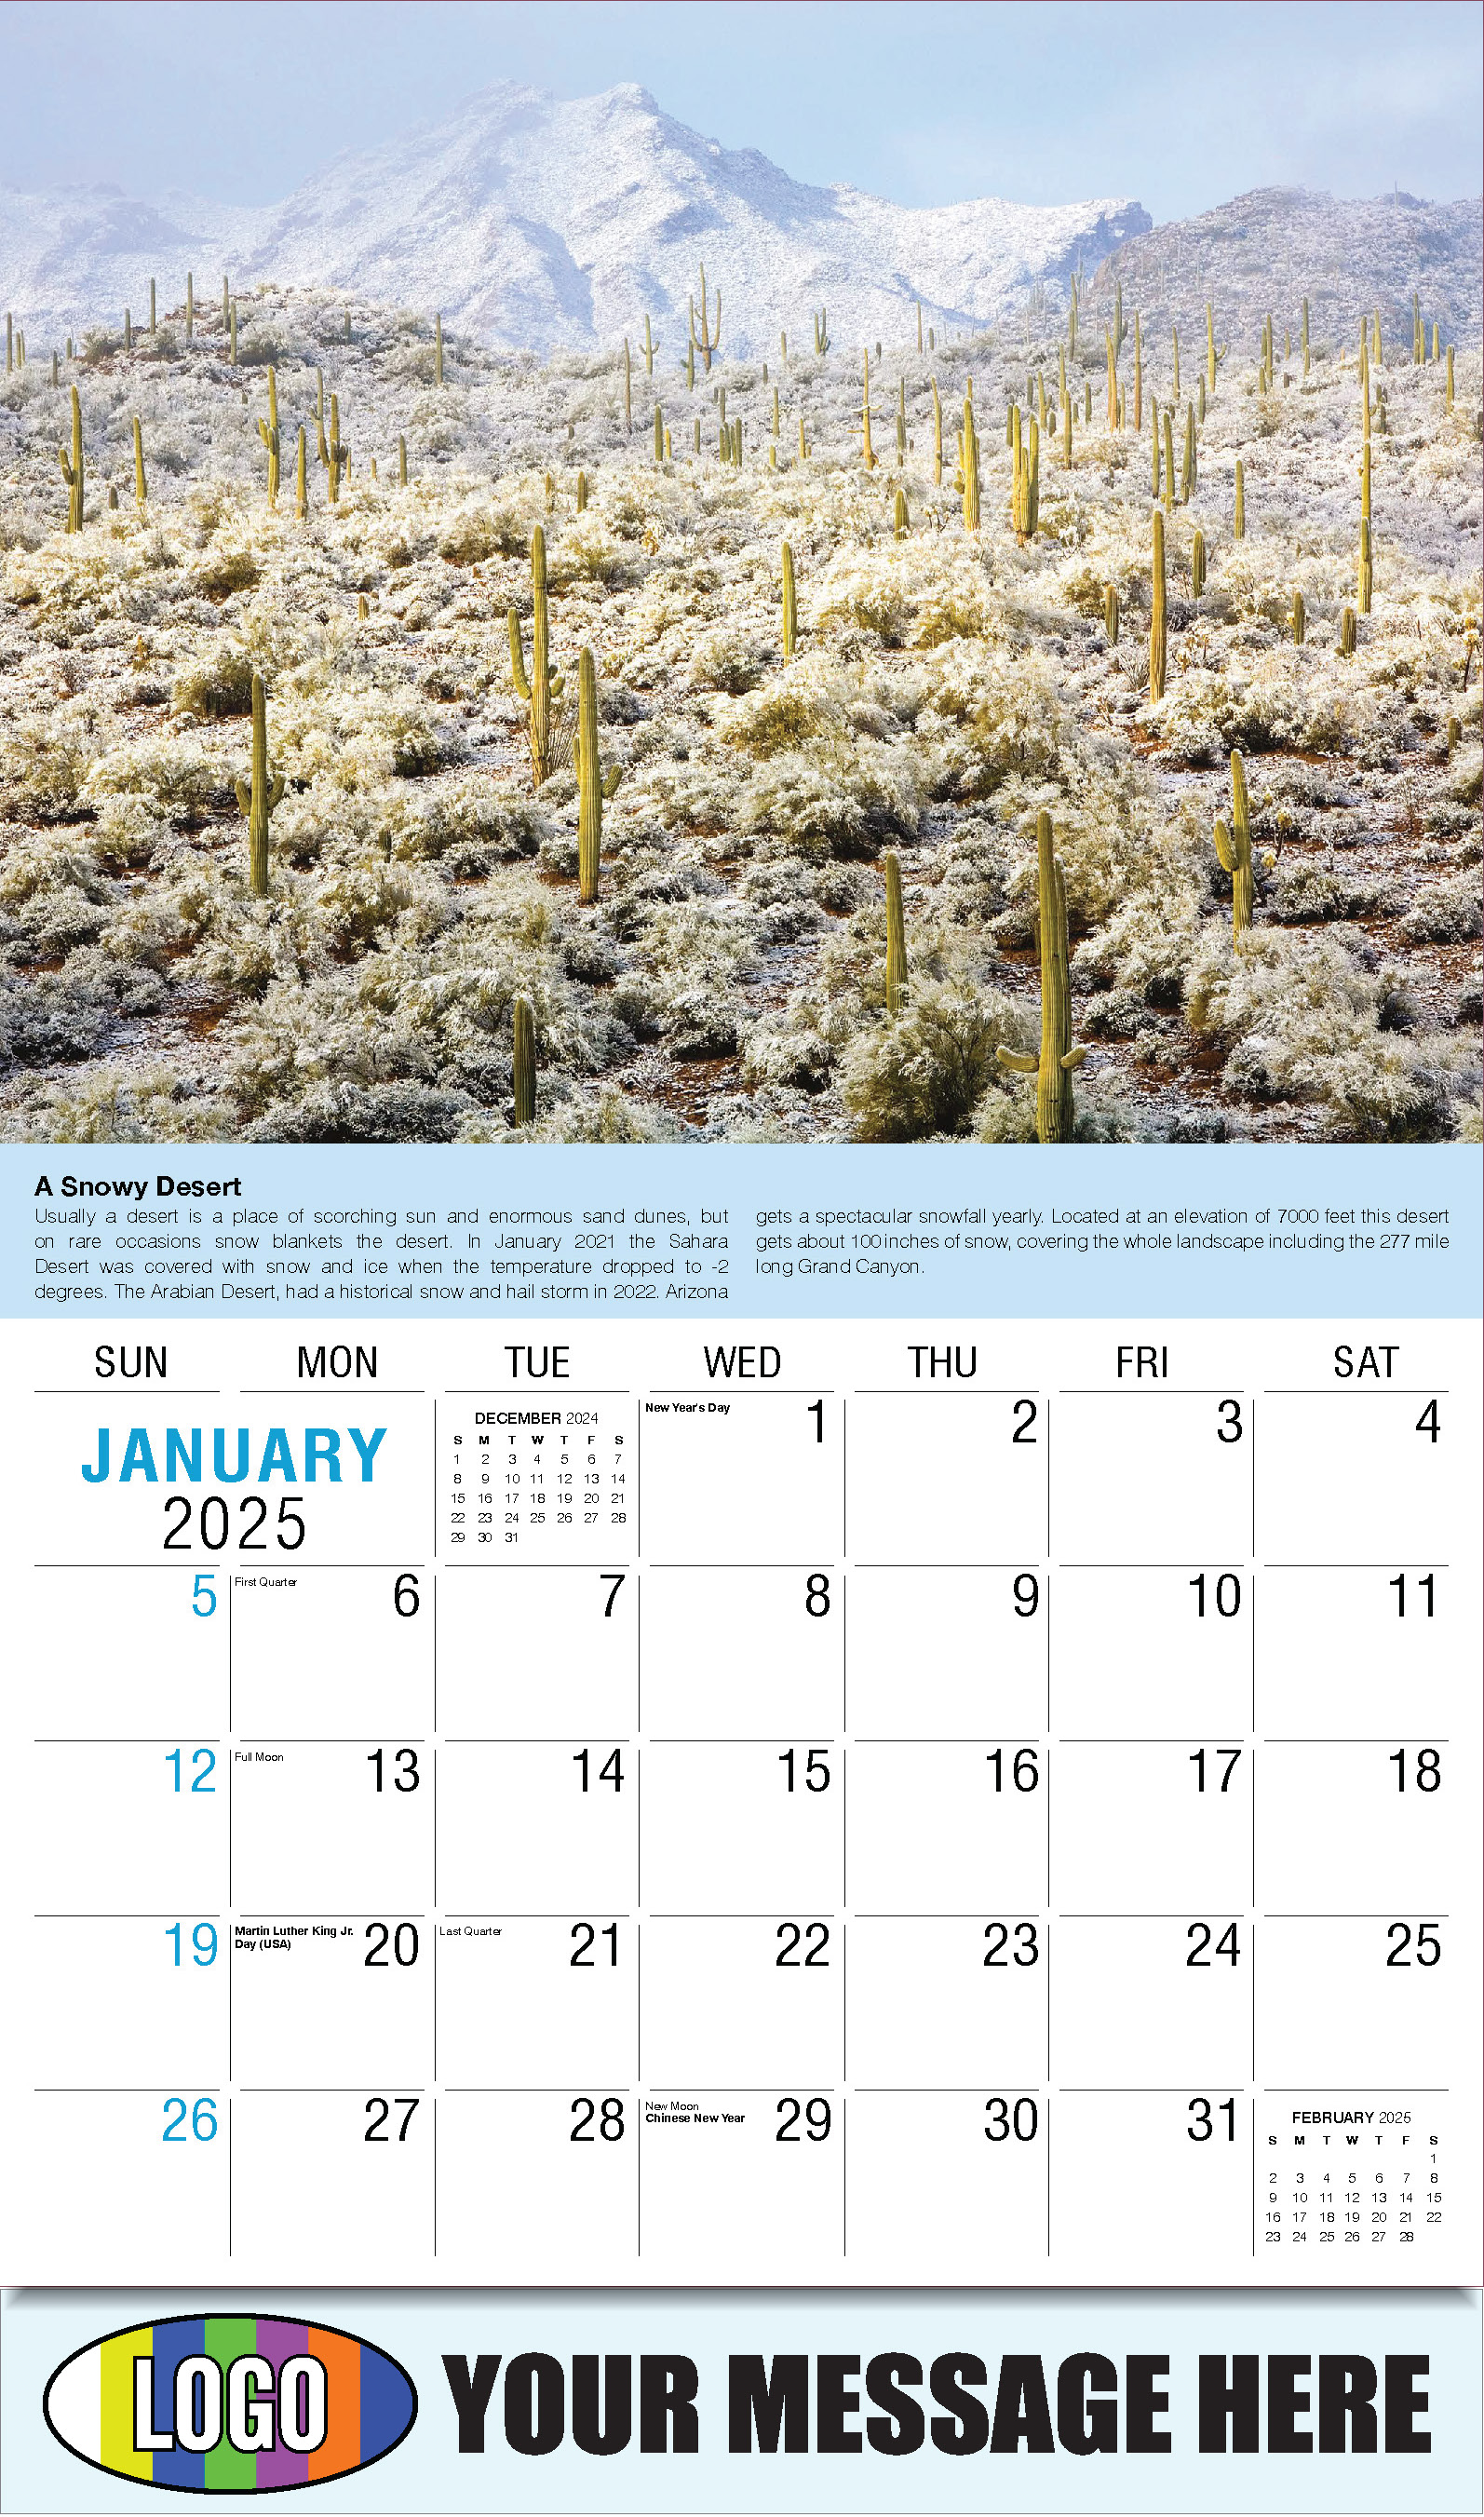 Planet Earth 2025 Business Promotional Wall Calendar - January